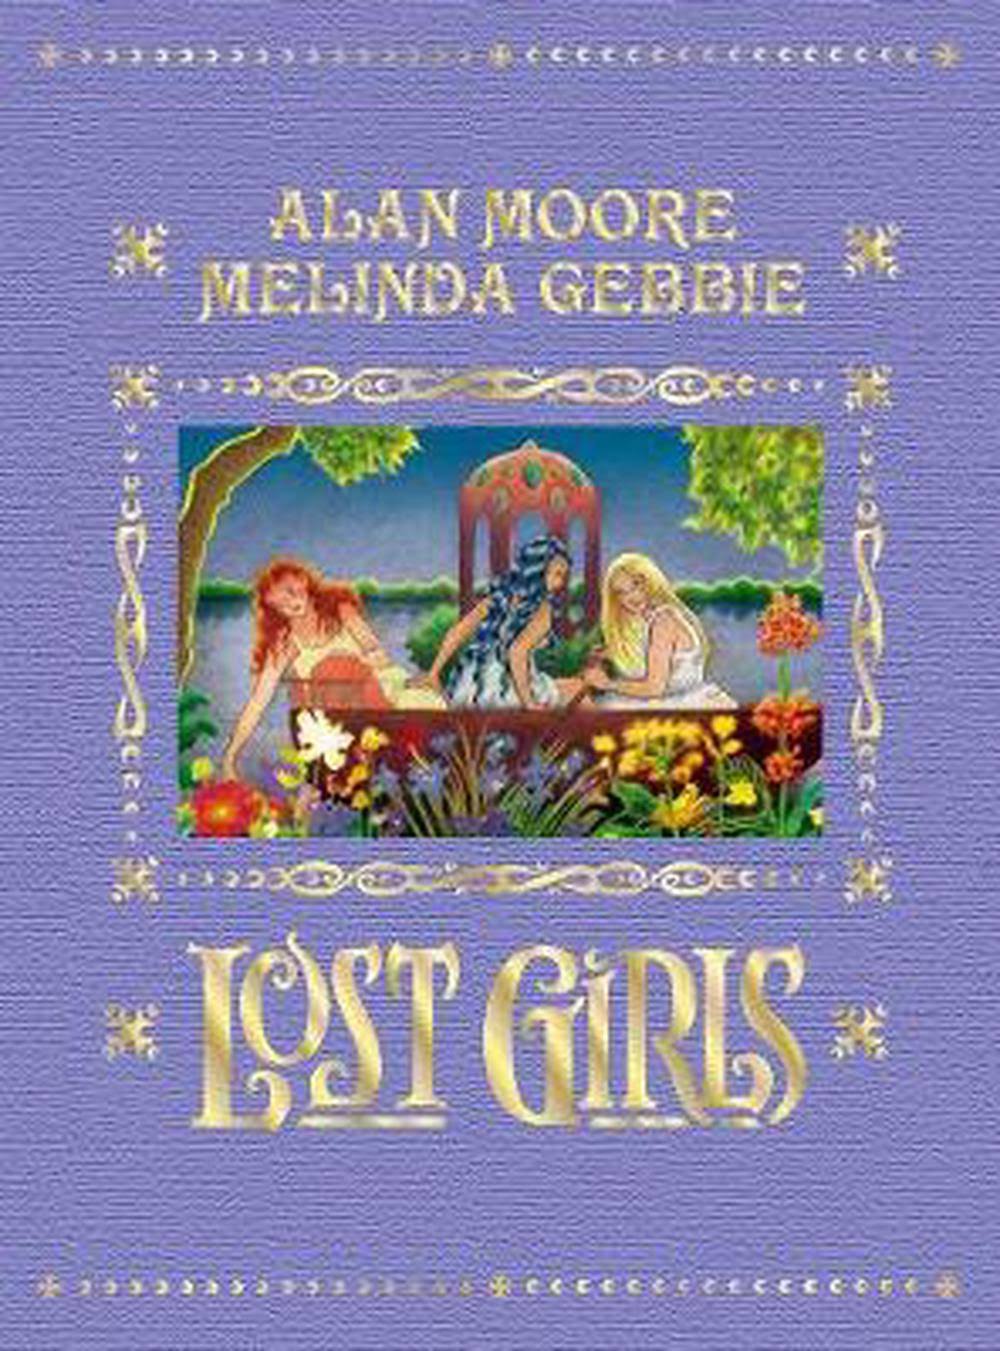 Lost Girls by Alan Moore